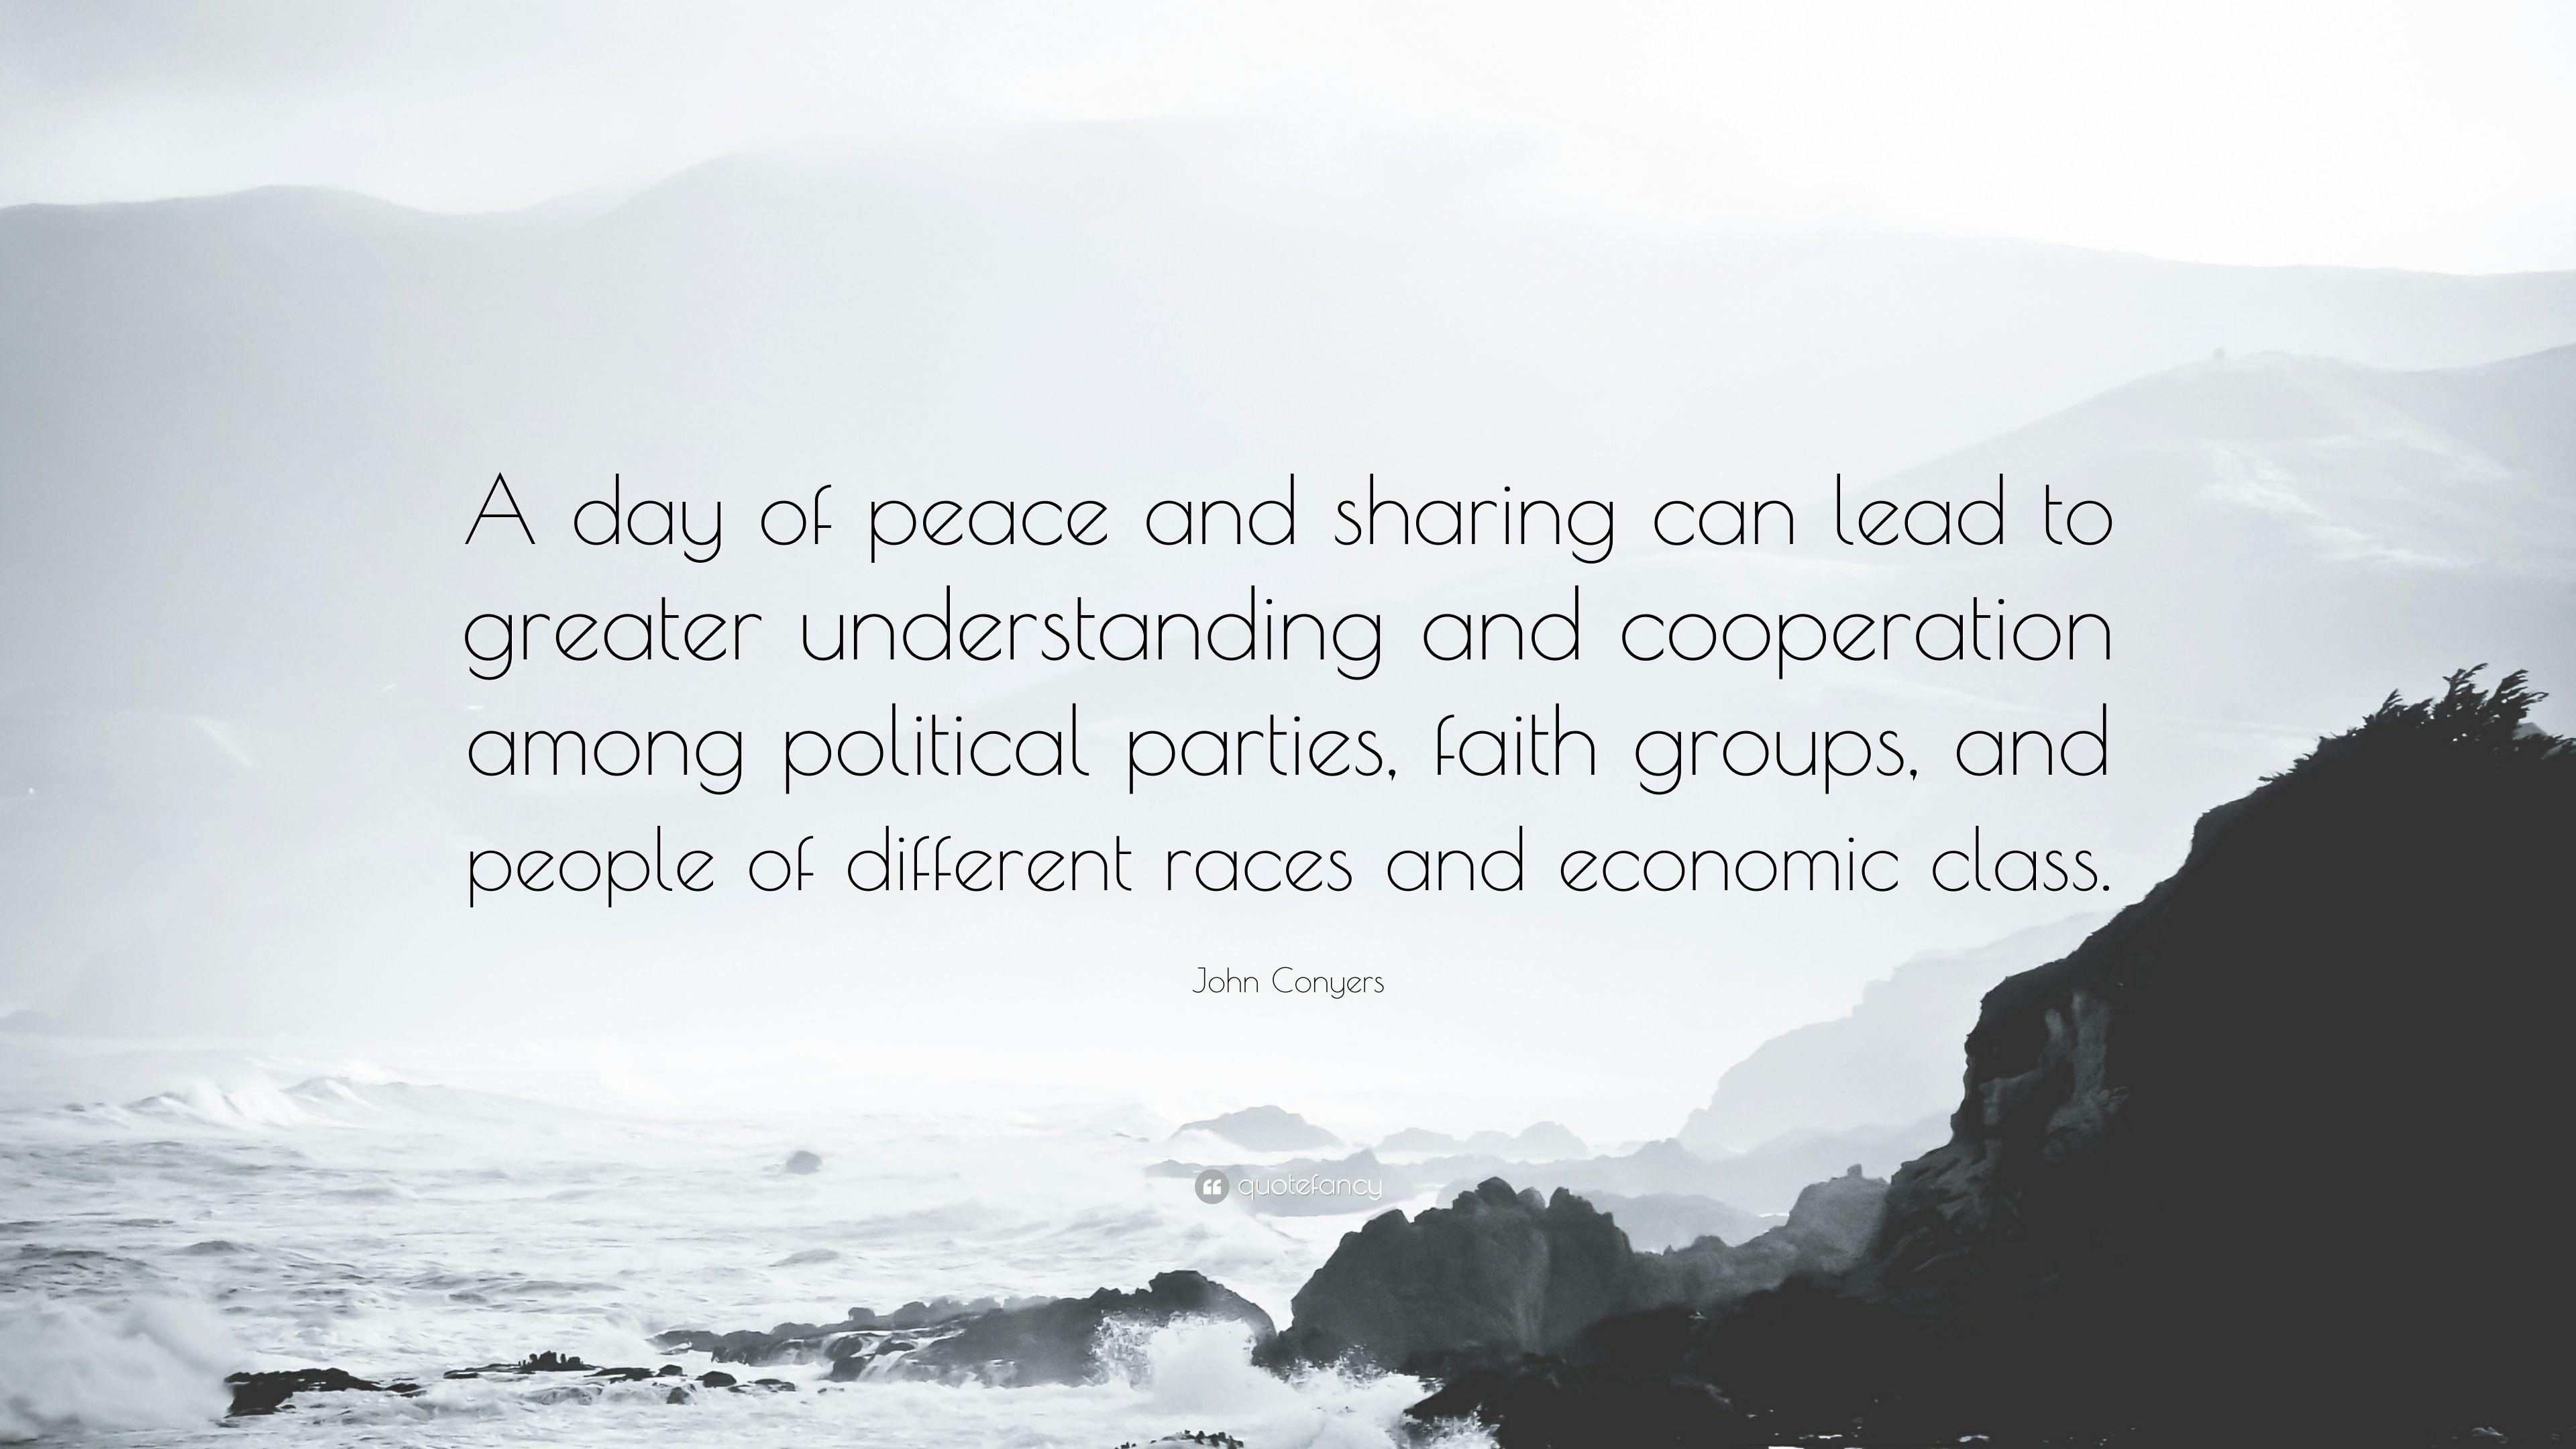 John Conyers Quote: “A day of peace and sharing can lead to